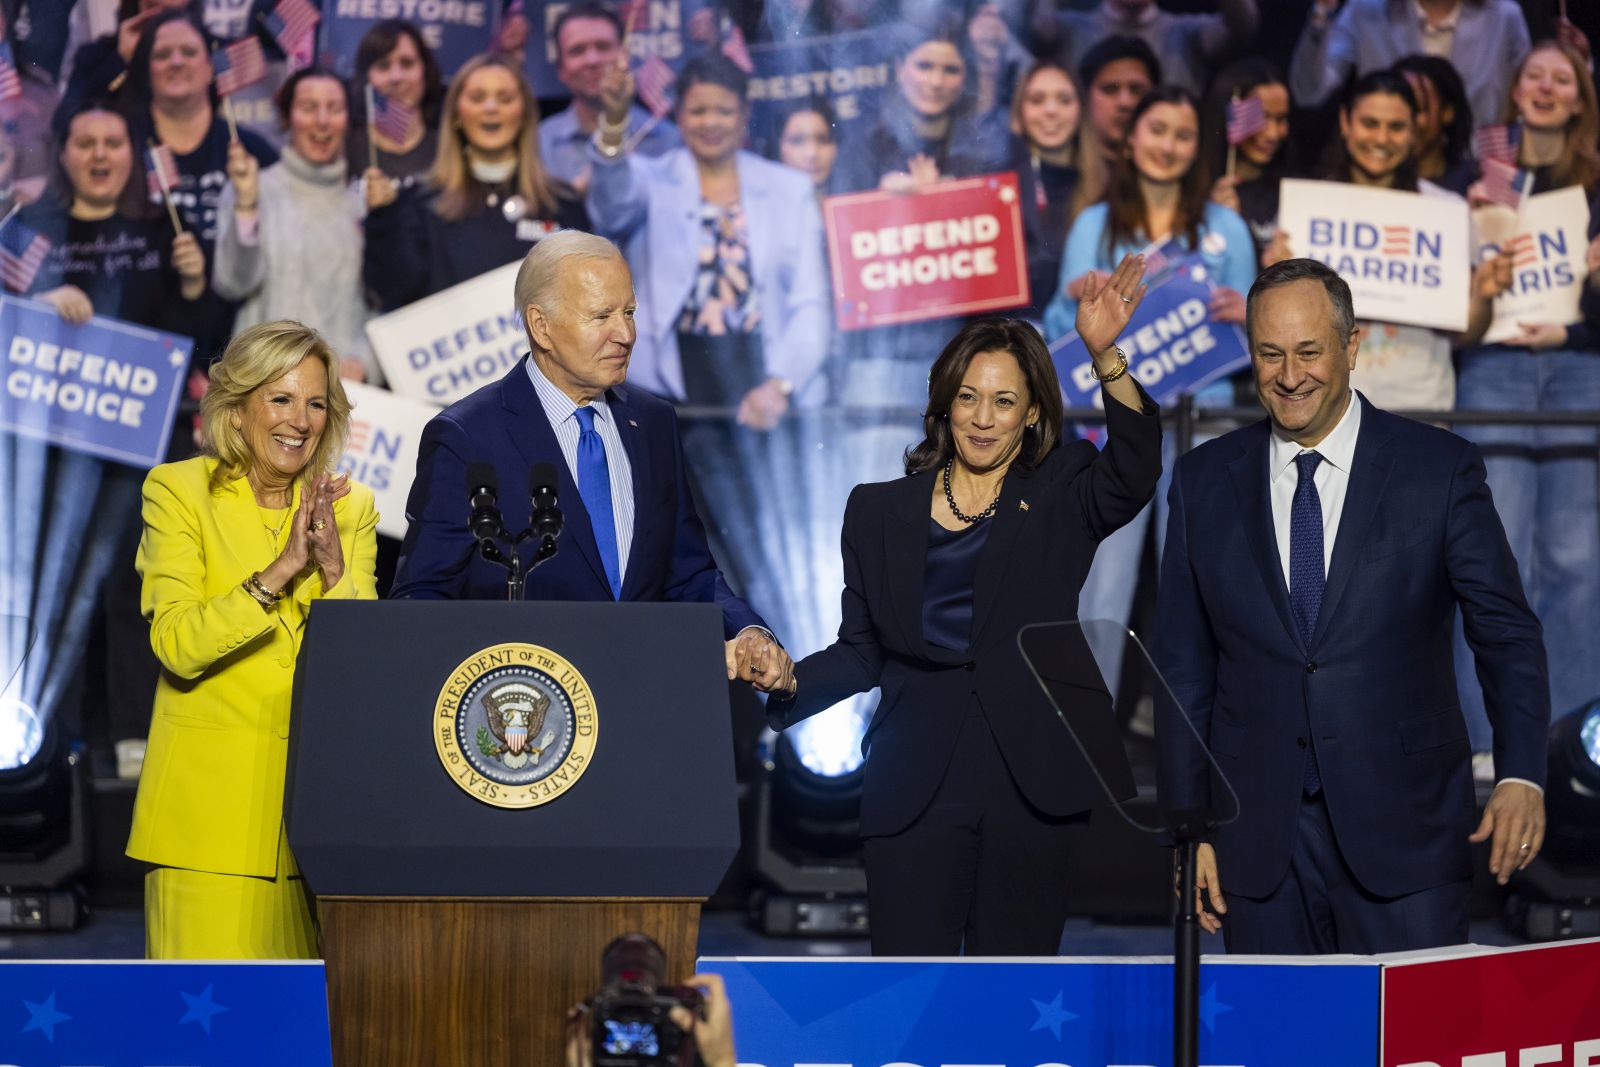 epa11099801 US President Joe Biden (C-L), along with First Lady Jill Biden (L), Vice President Kamala Harris (C-R), and First Gentleman Douglas Emhoff (R), celebrate at a campaign rally for abortion rights at George Mason University in Manassas, Virginia, USA, 23 January 2024. The rally comes one day after the 51st anniversary of the Supreme Court's Roe v. Wade decision, which the high justices overturned in 2022.  EPA/JIM LO SCALZO